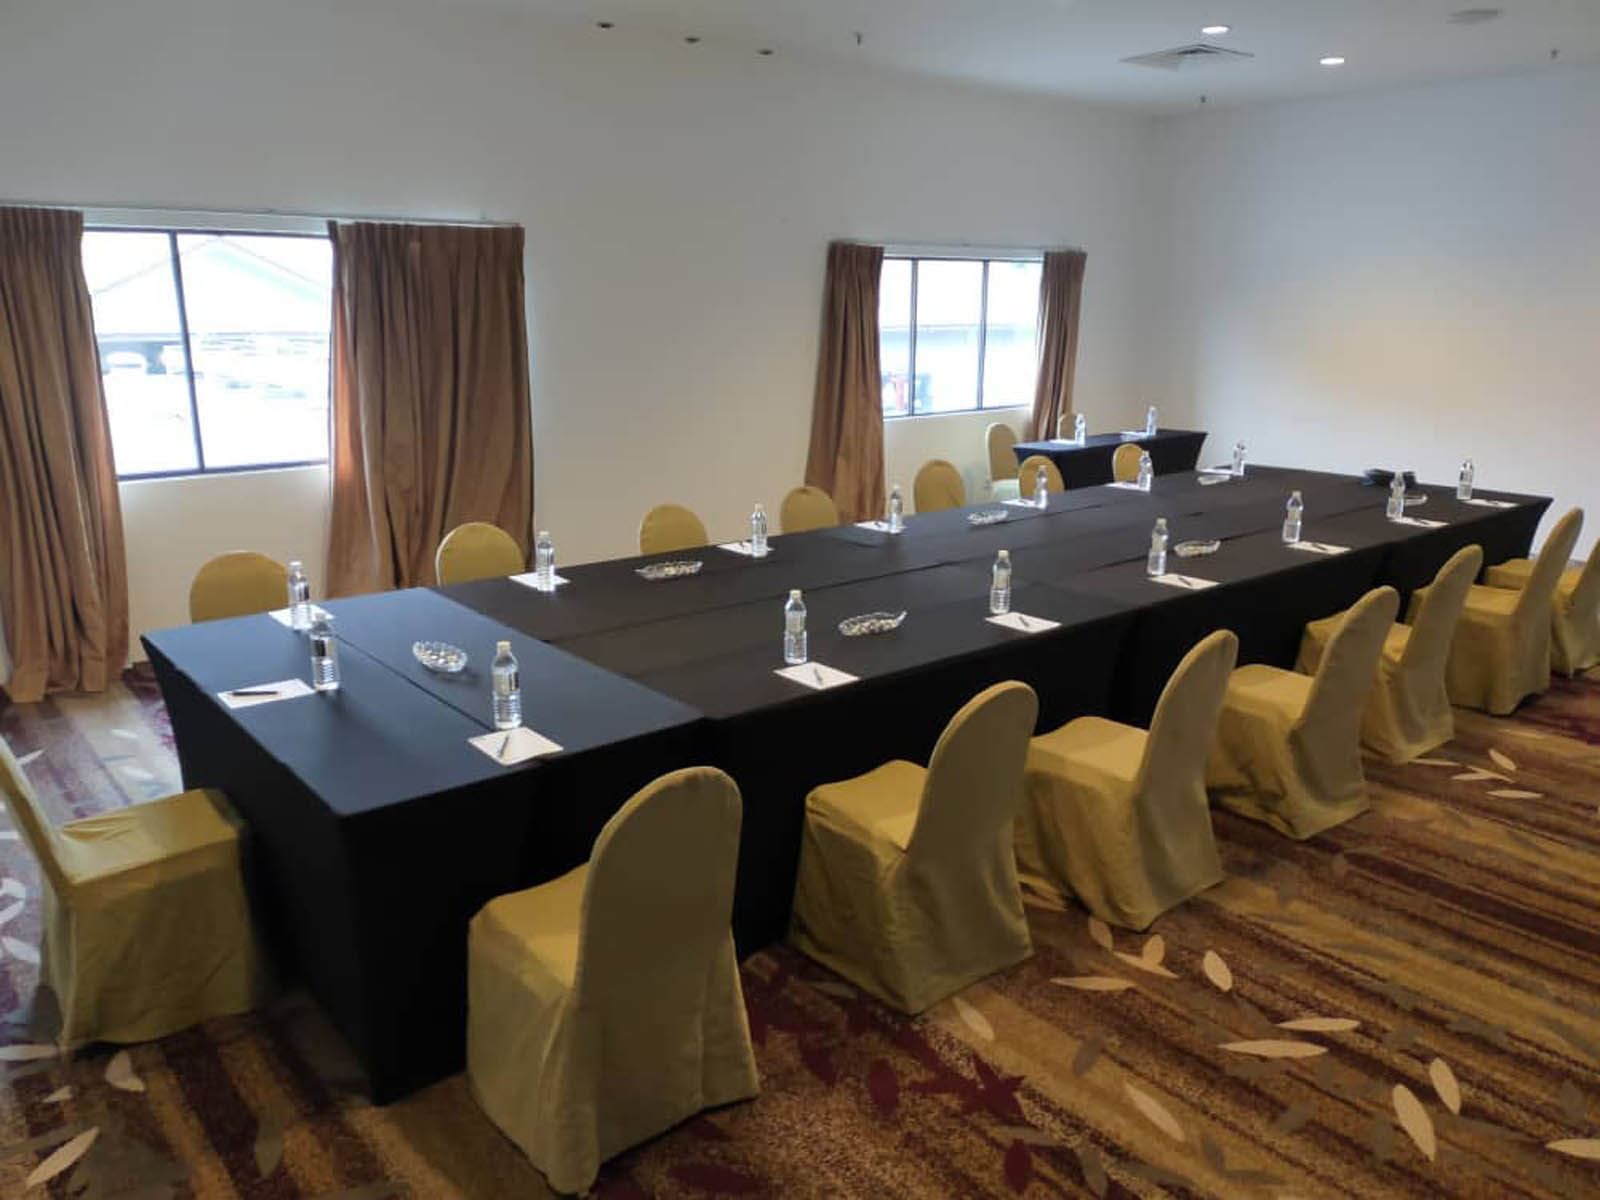 The arranged Cumberland meeting room with chairs and a table